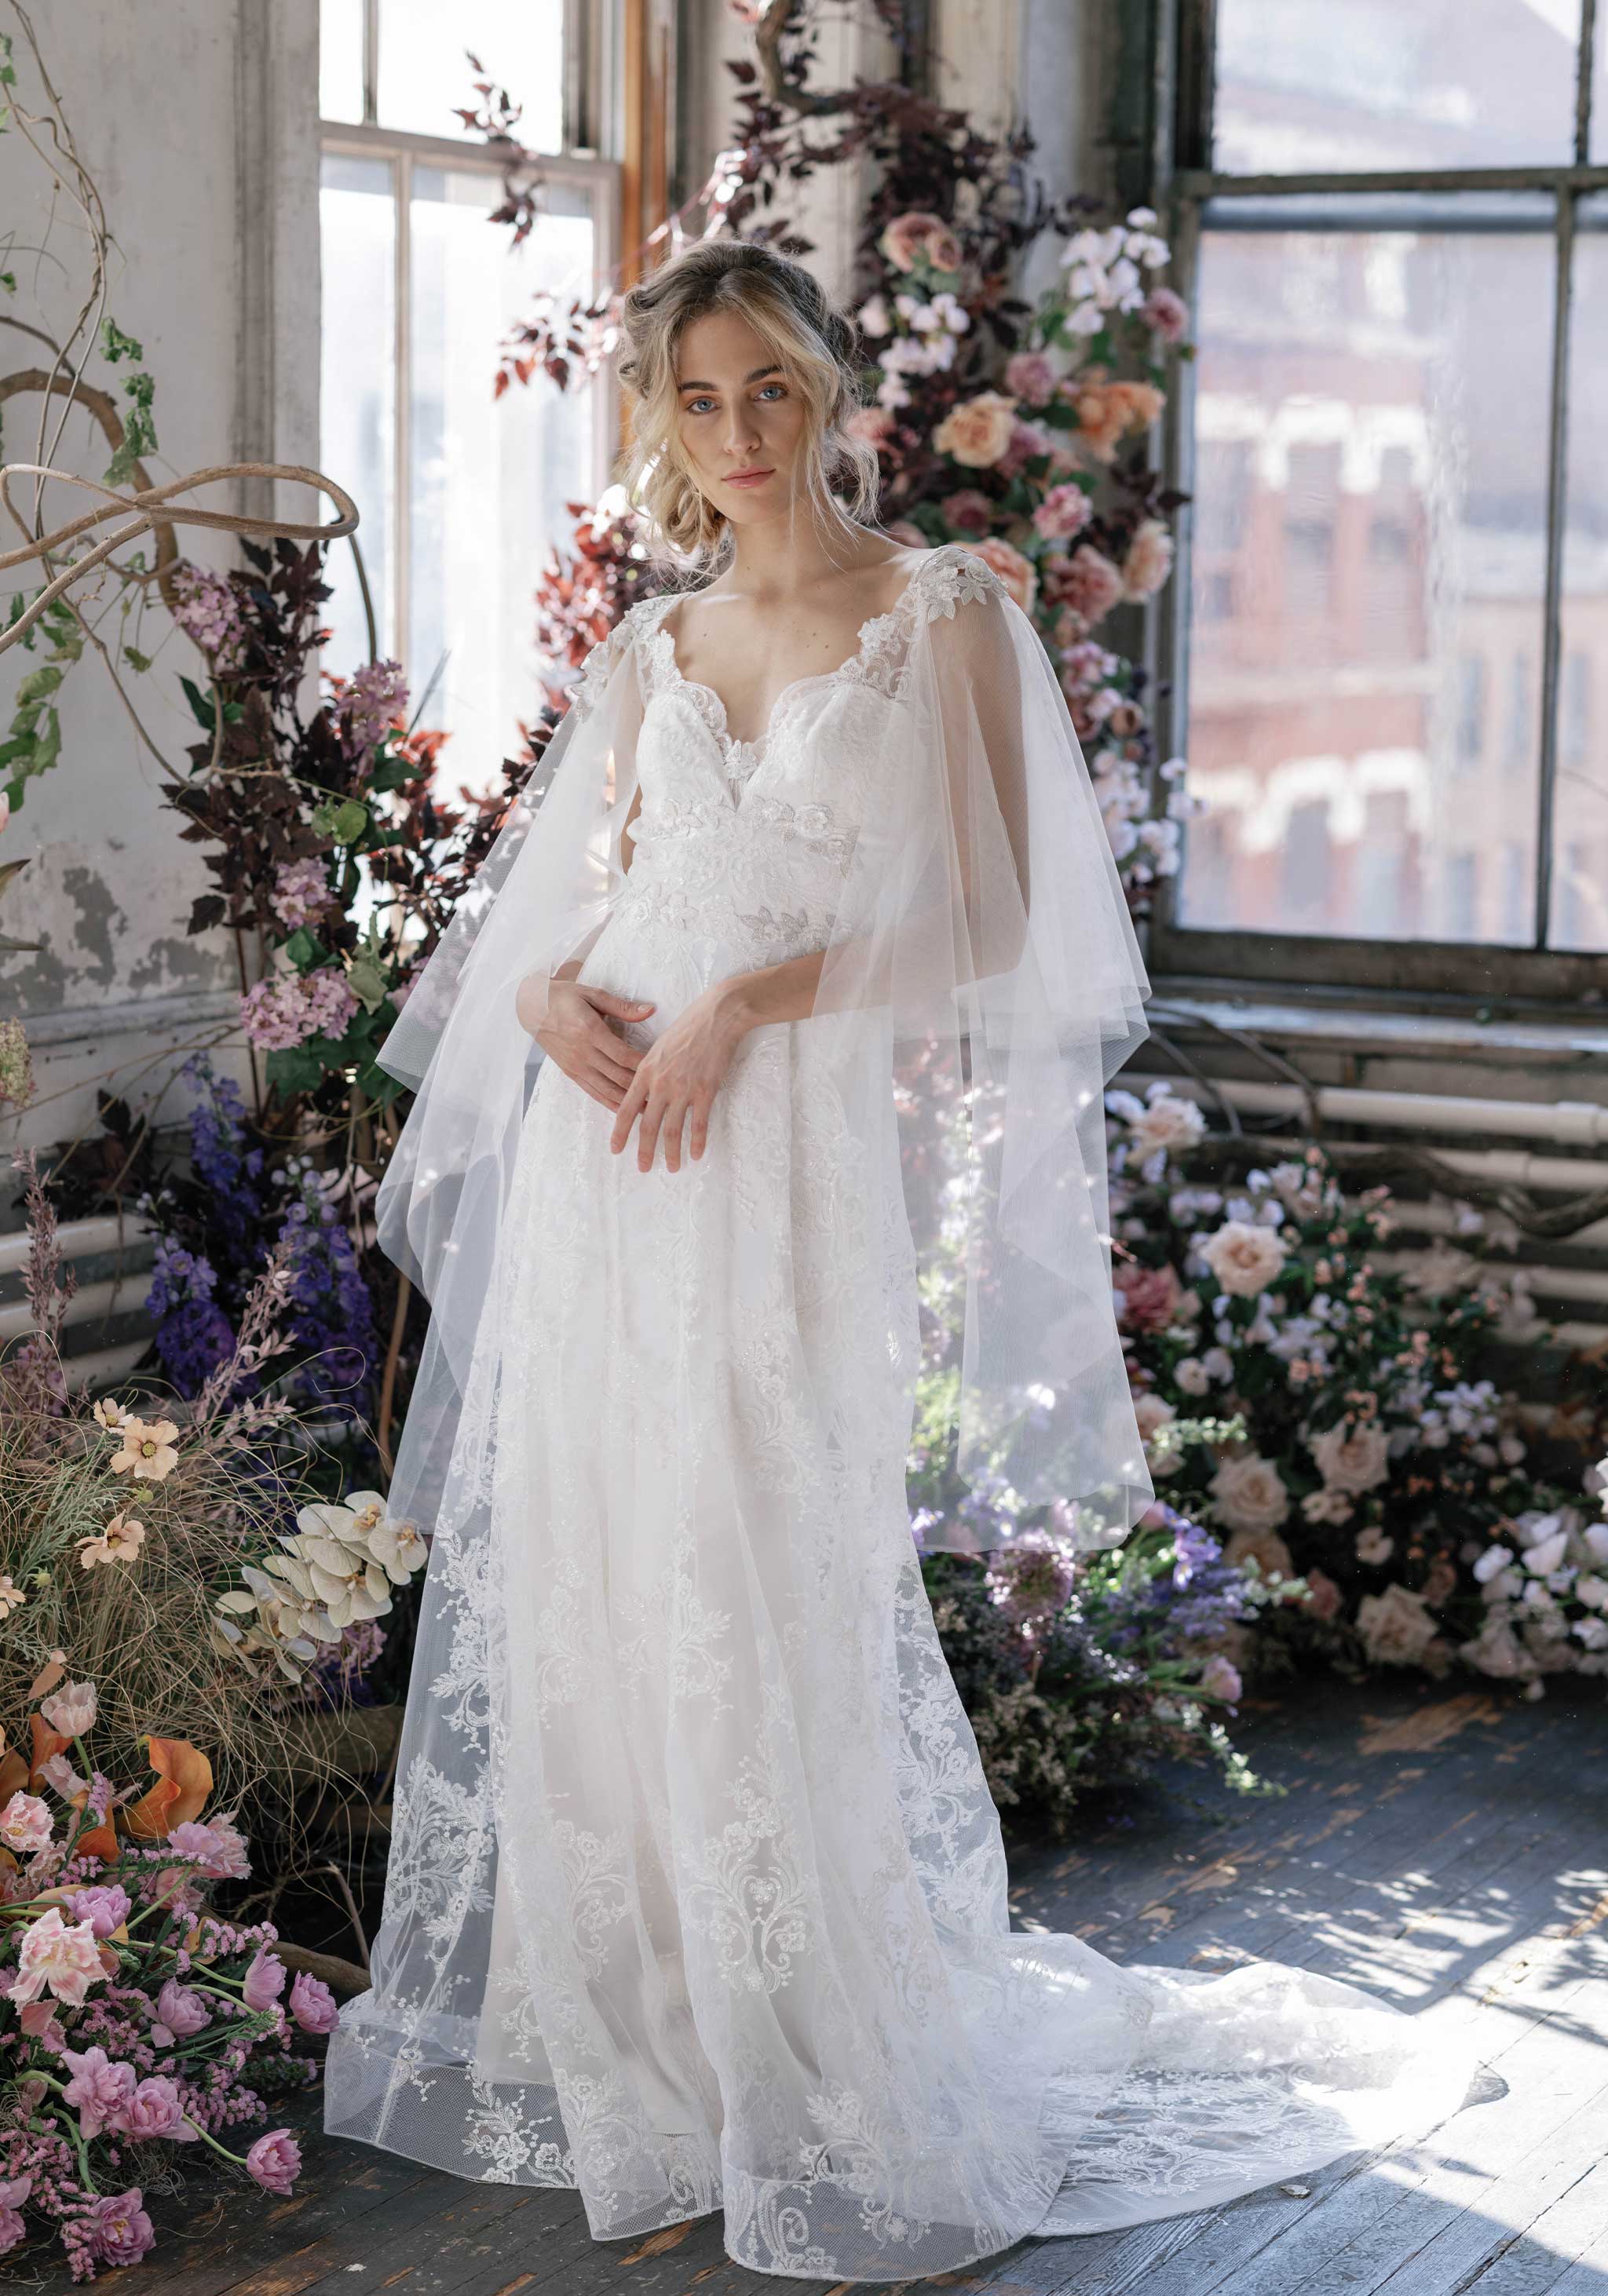 A Blossoming Romance: The Floral Wedding Dress Trend in 2024 - Bespoke-Bride:  Wedding Blog